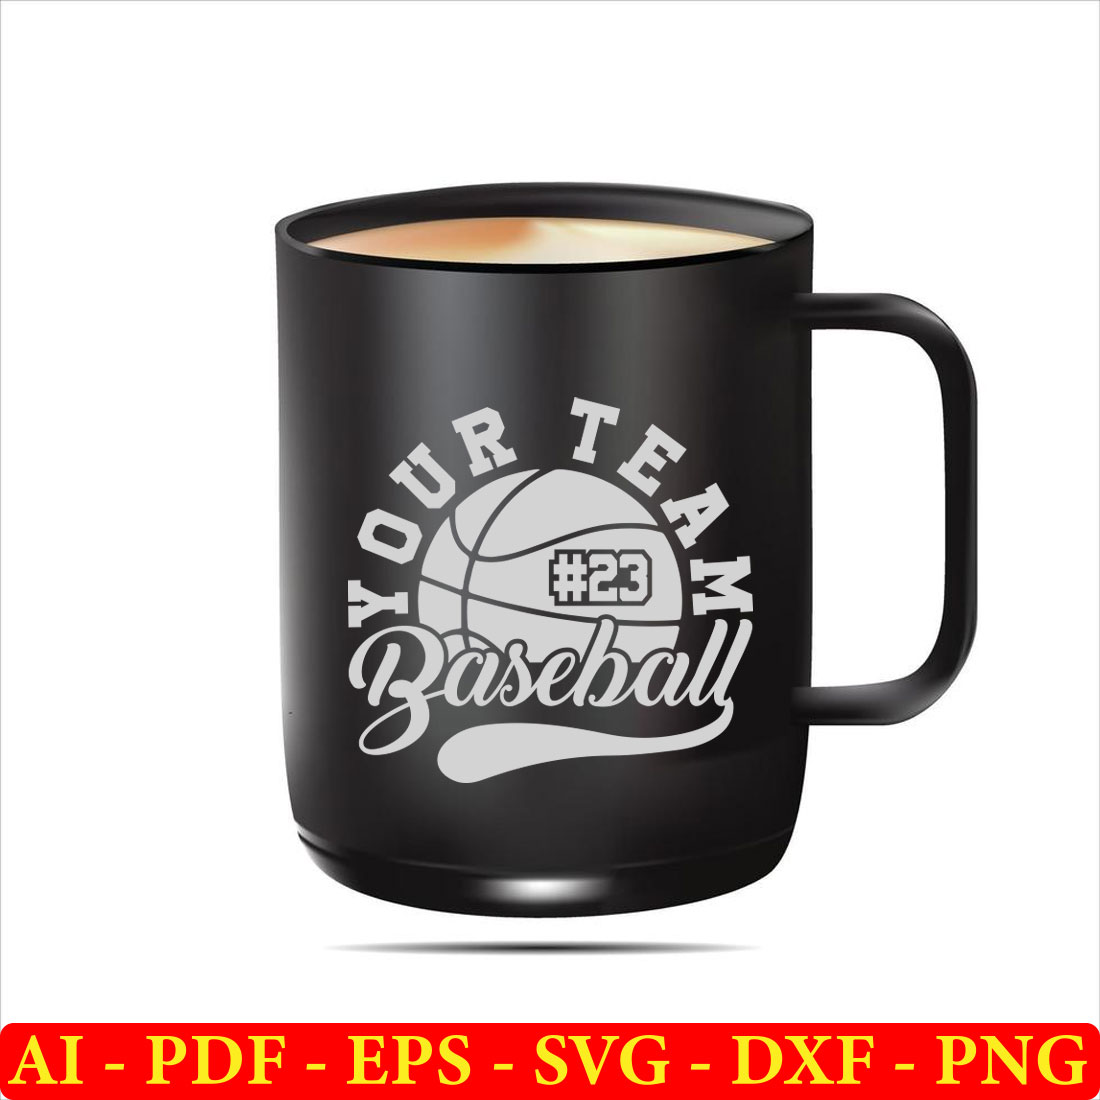 Black coffee mug with the words your team baseball on it.